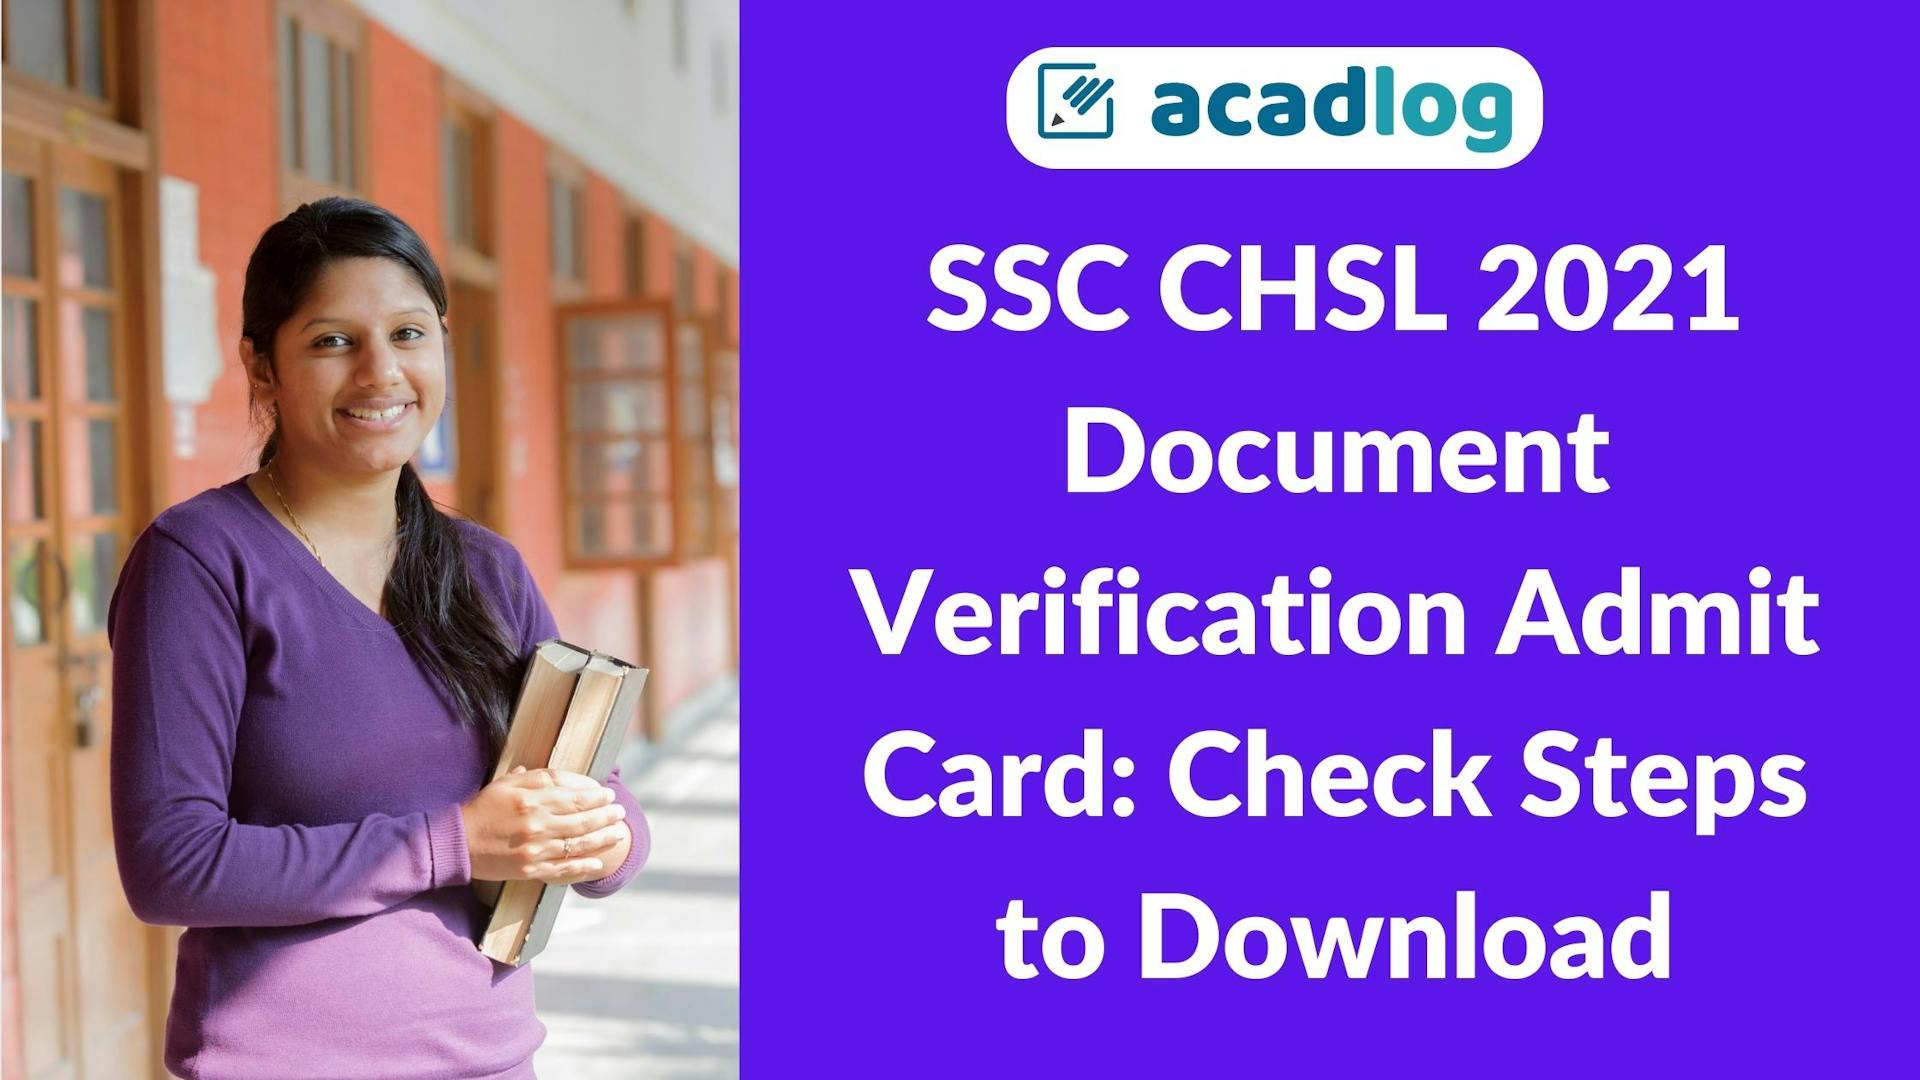 SSC CHSL 2021 Document Verification Admit Card: Check Steps to Download